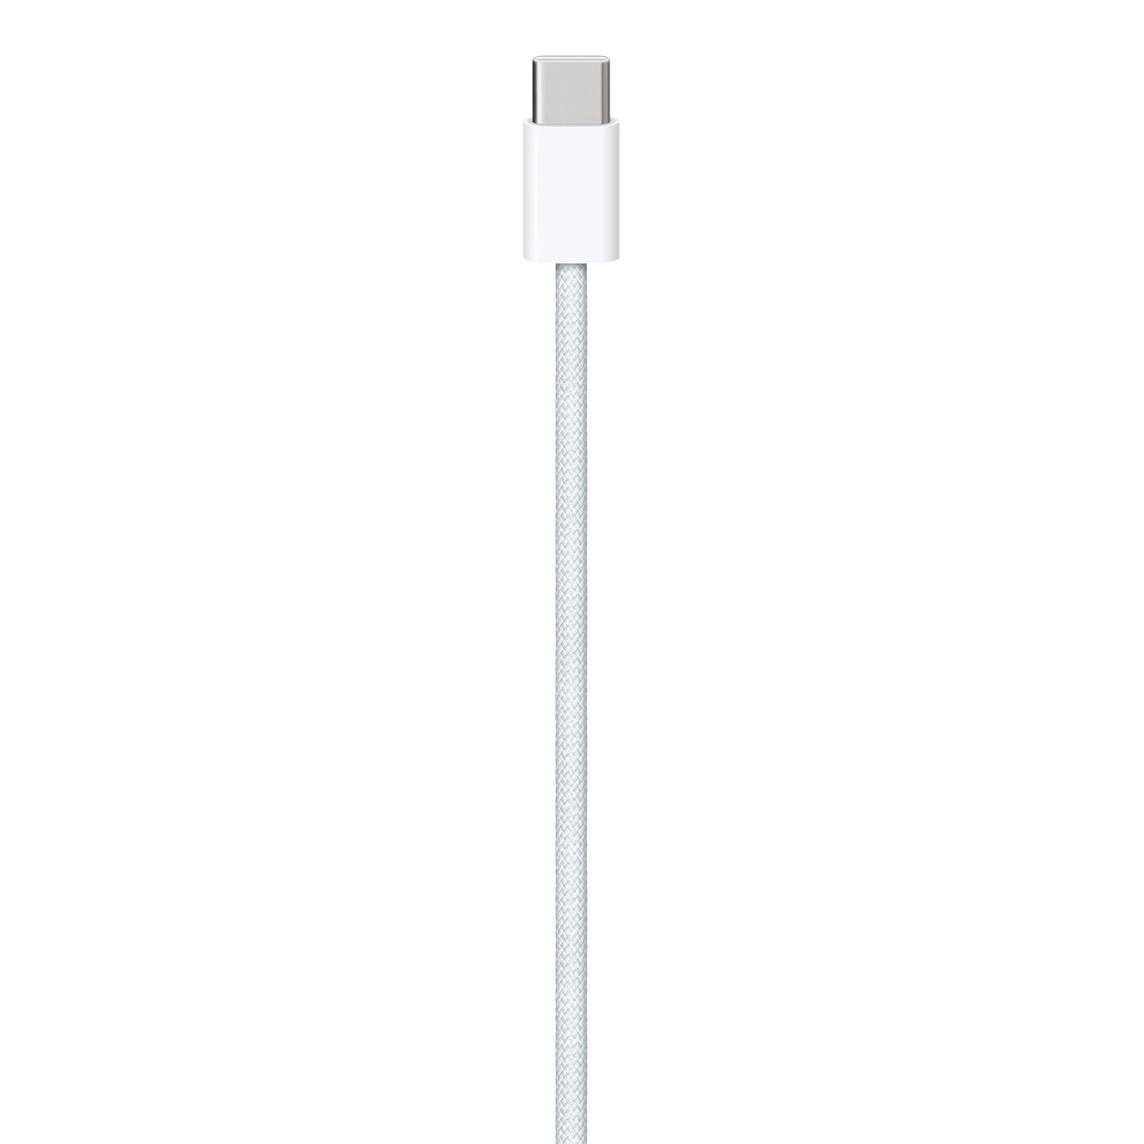 Apple 1 Meter USB 3.2 Type-C to Type-C Power/Charging USB Cable, Woven Design, (MQKJ3ZM/A) White